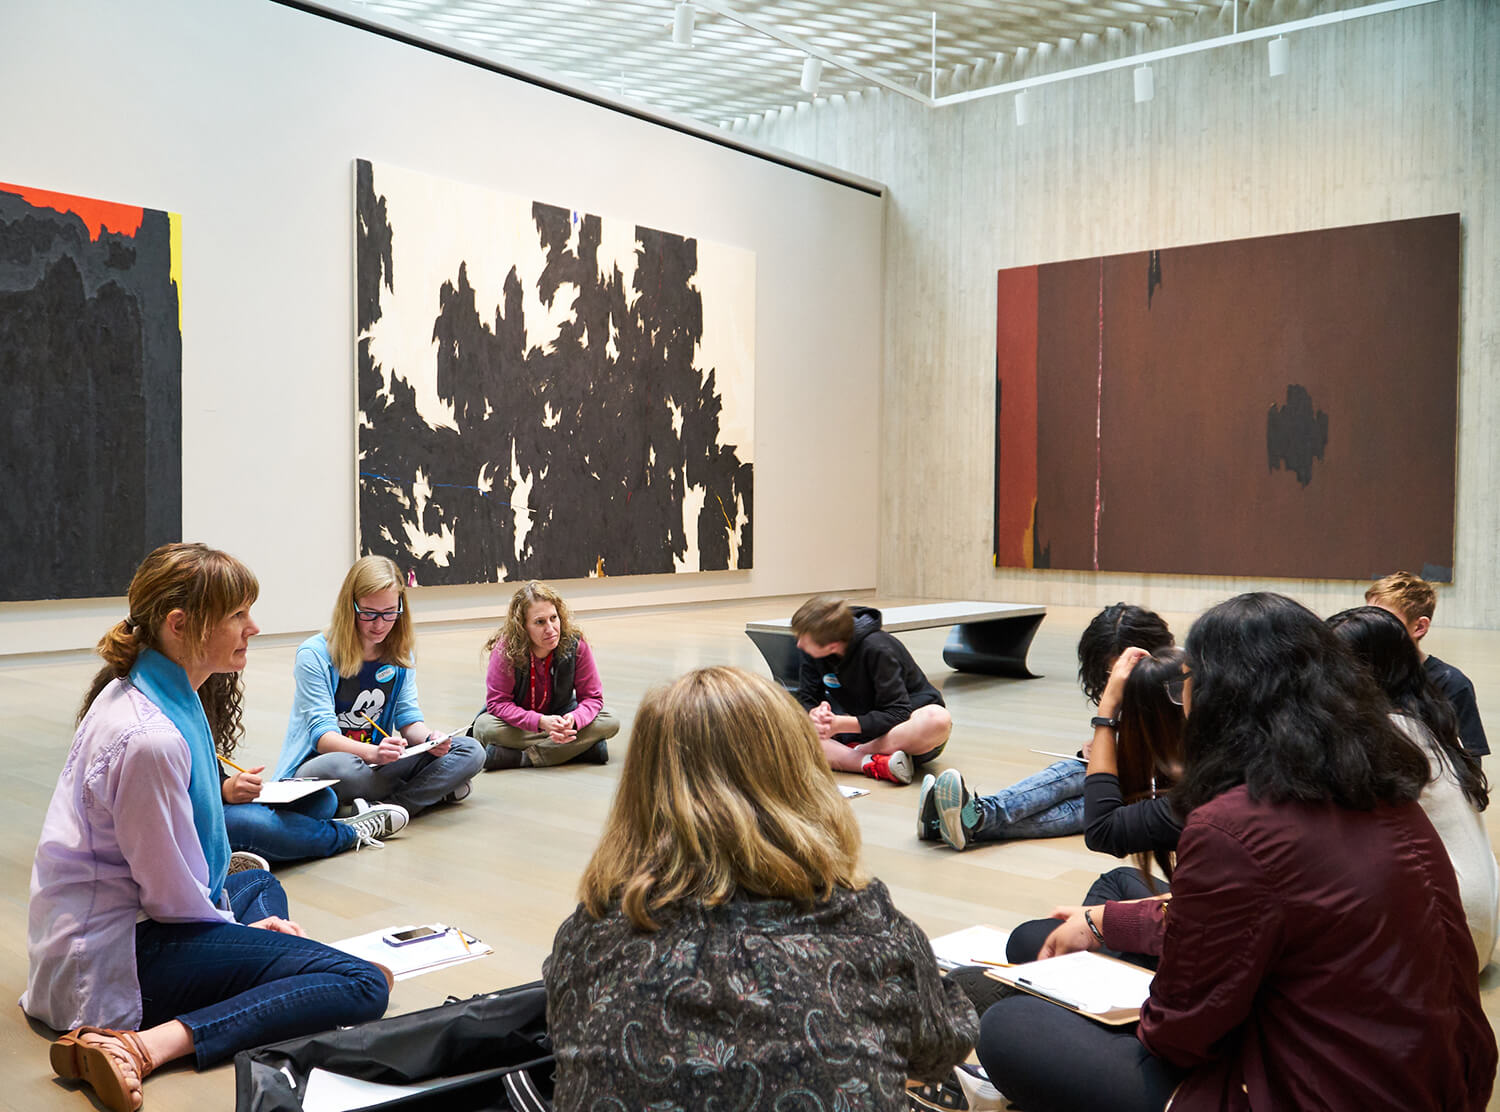 Students and teachers sit on the floor of a gallery at the Clyfford Still Museum